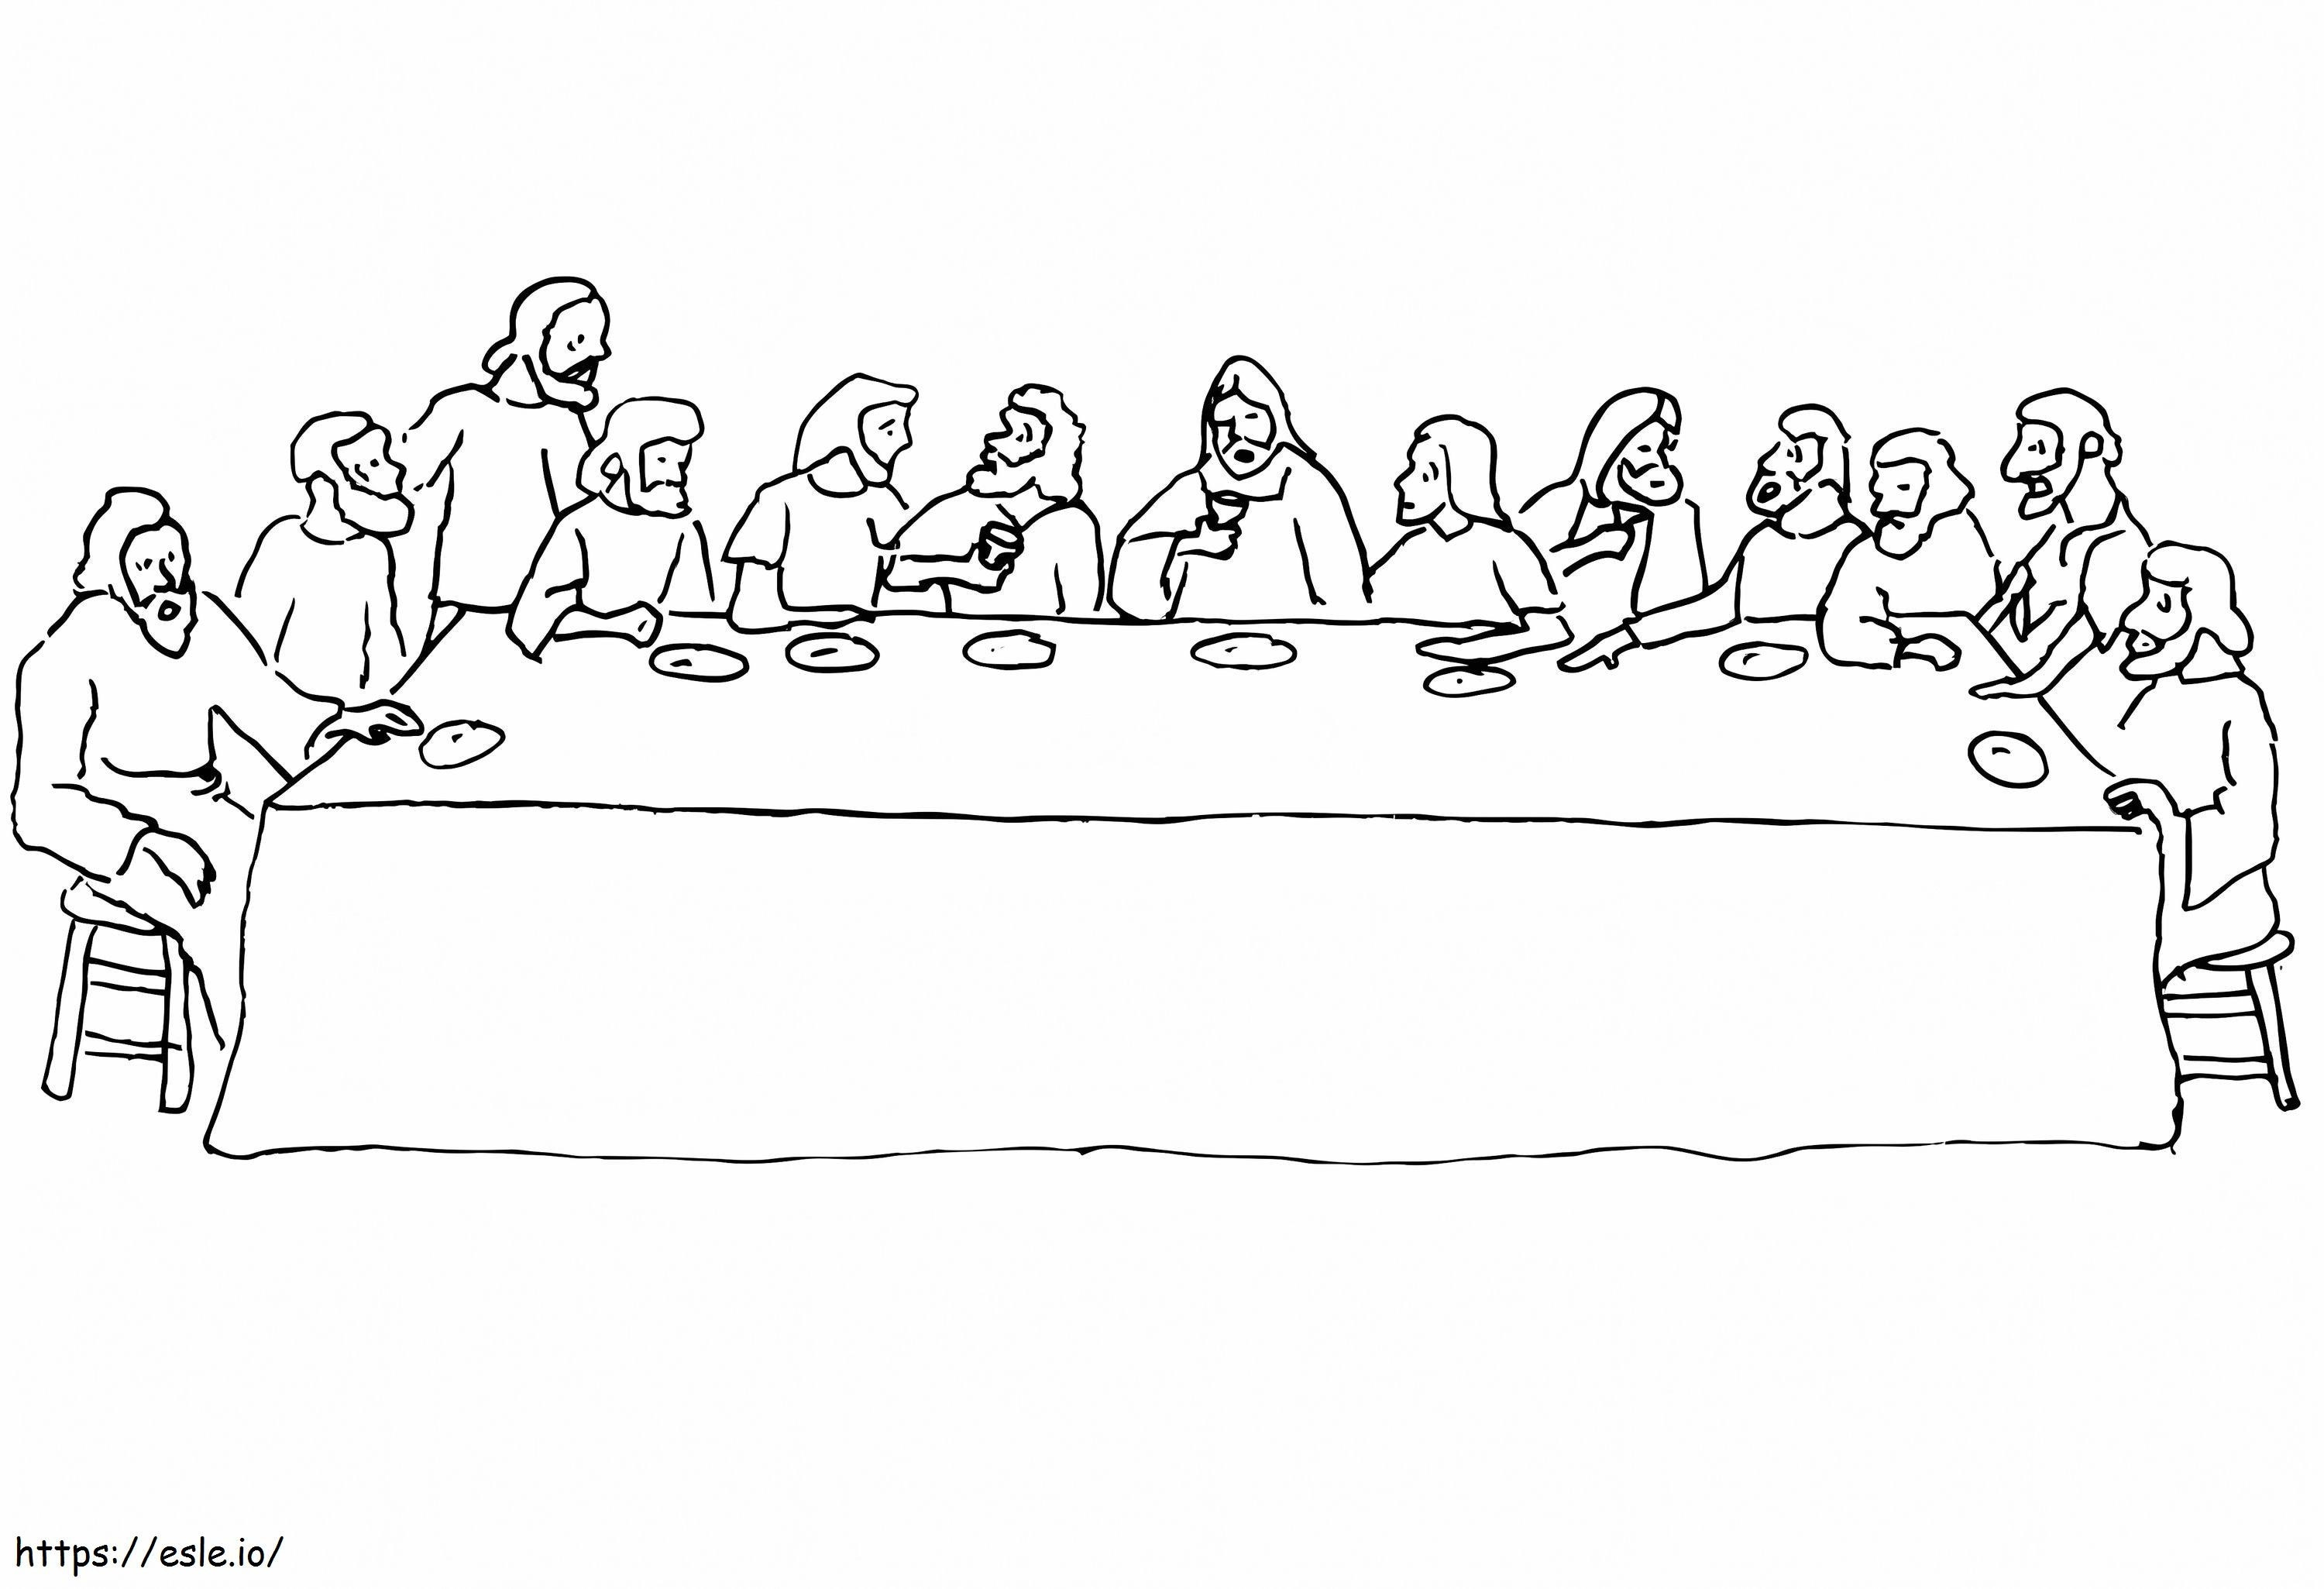 Last Supper 1 coloring page